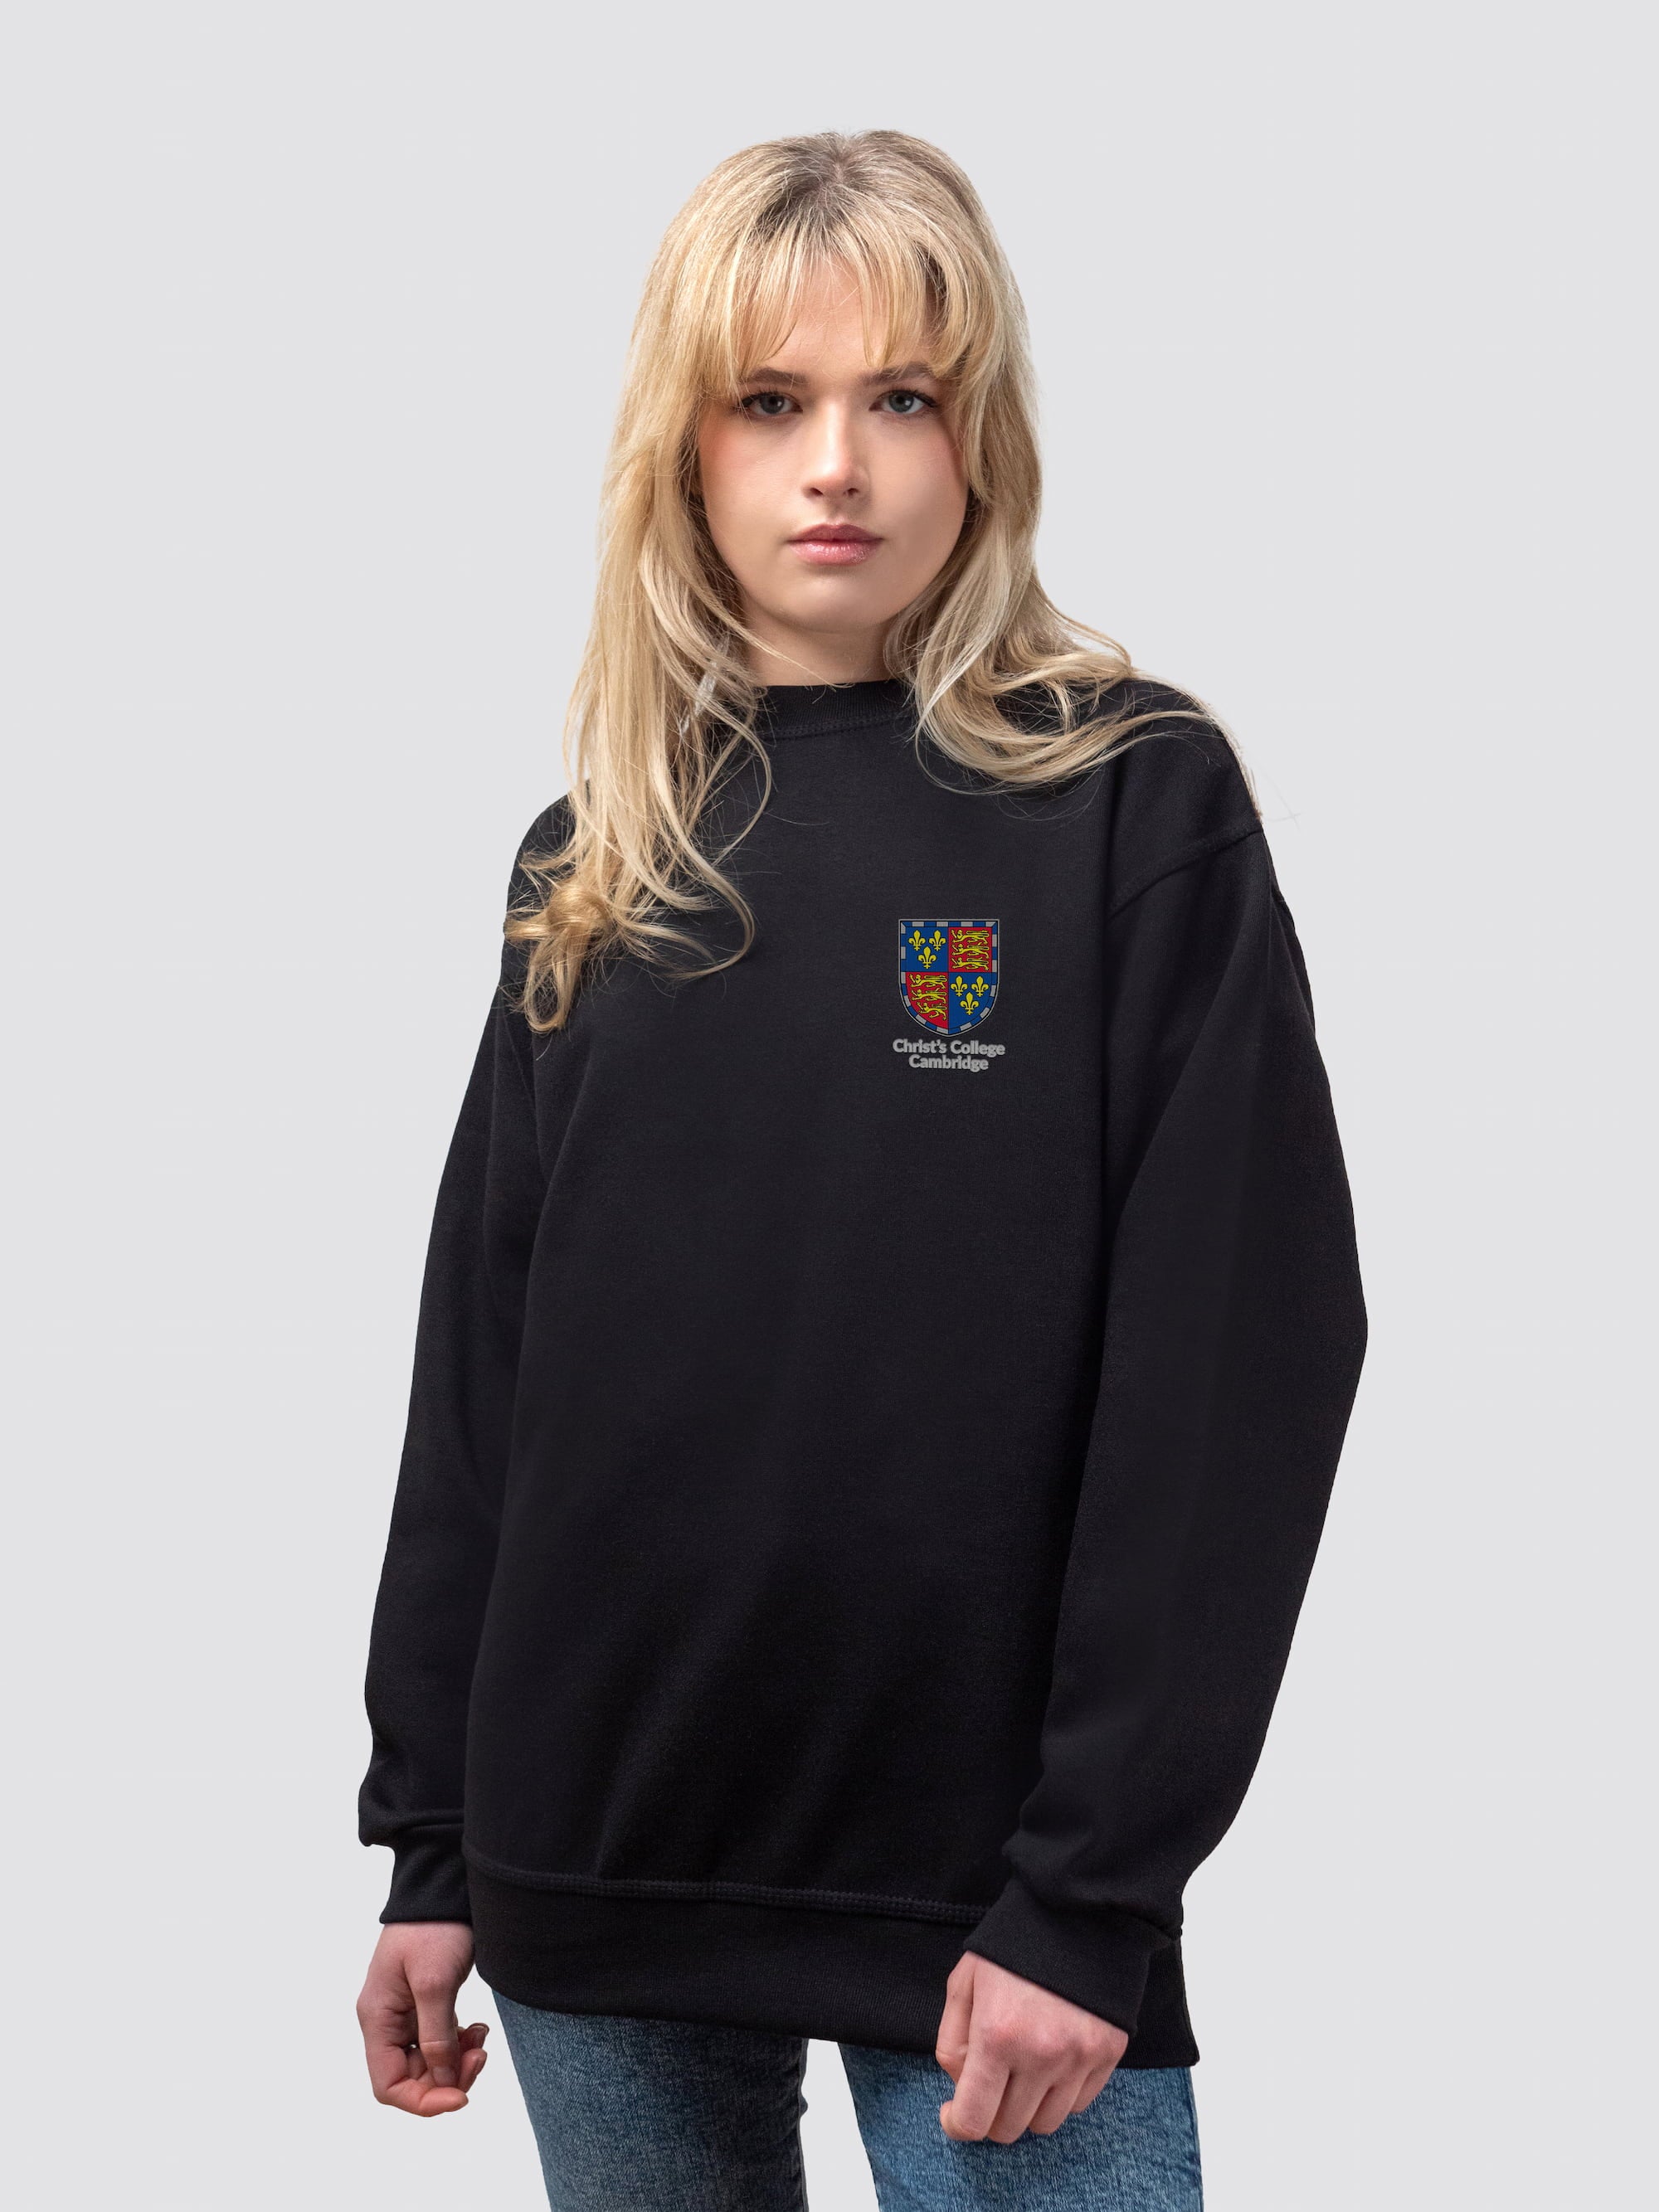 Christ's crest on the front of a black, crew-neck sweatshirt